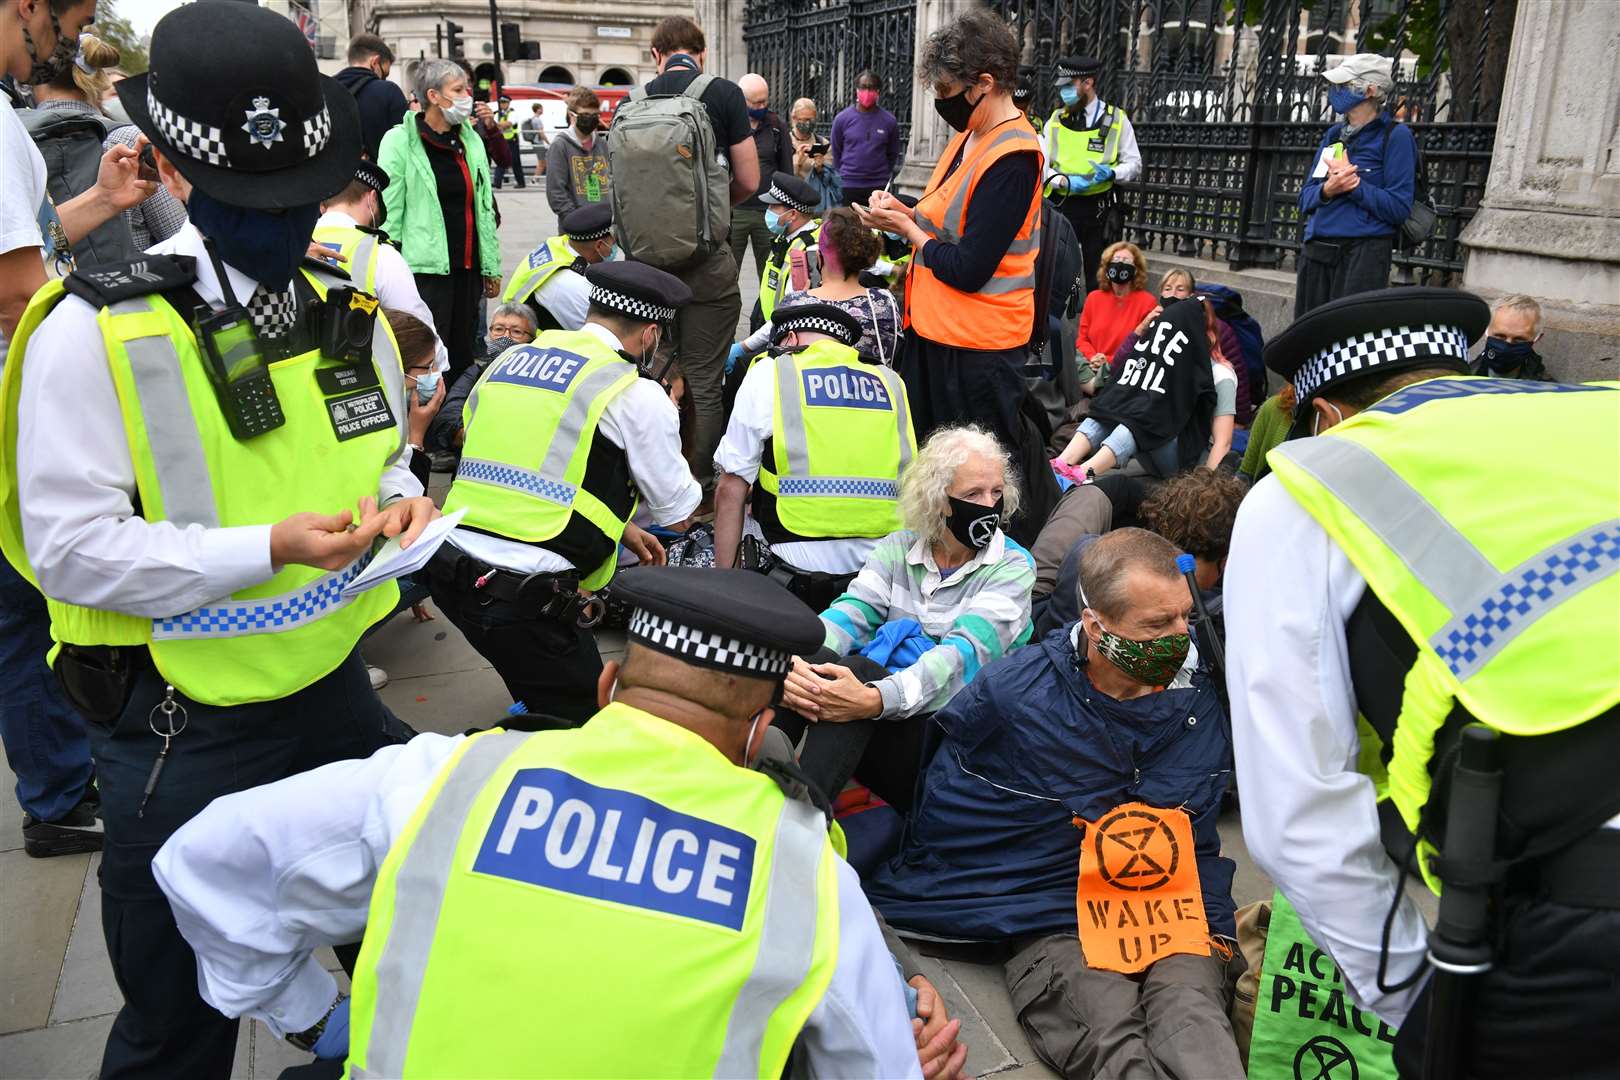 Police speak to protesters at the Carriage Gates entrance to the Houses of Parliament (Dominic Lipinski/PA)